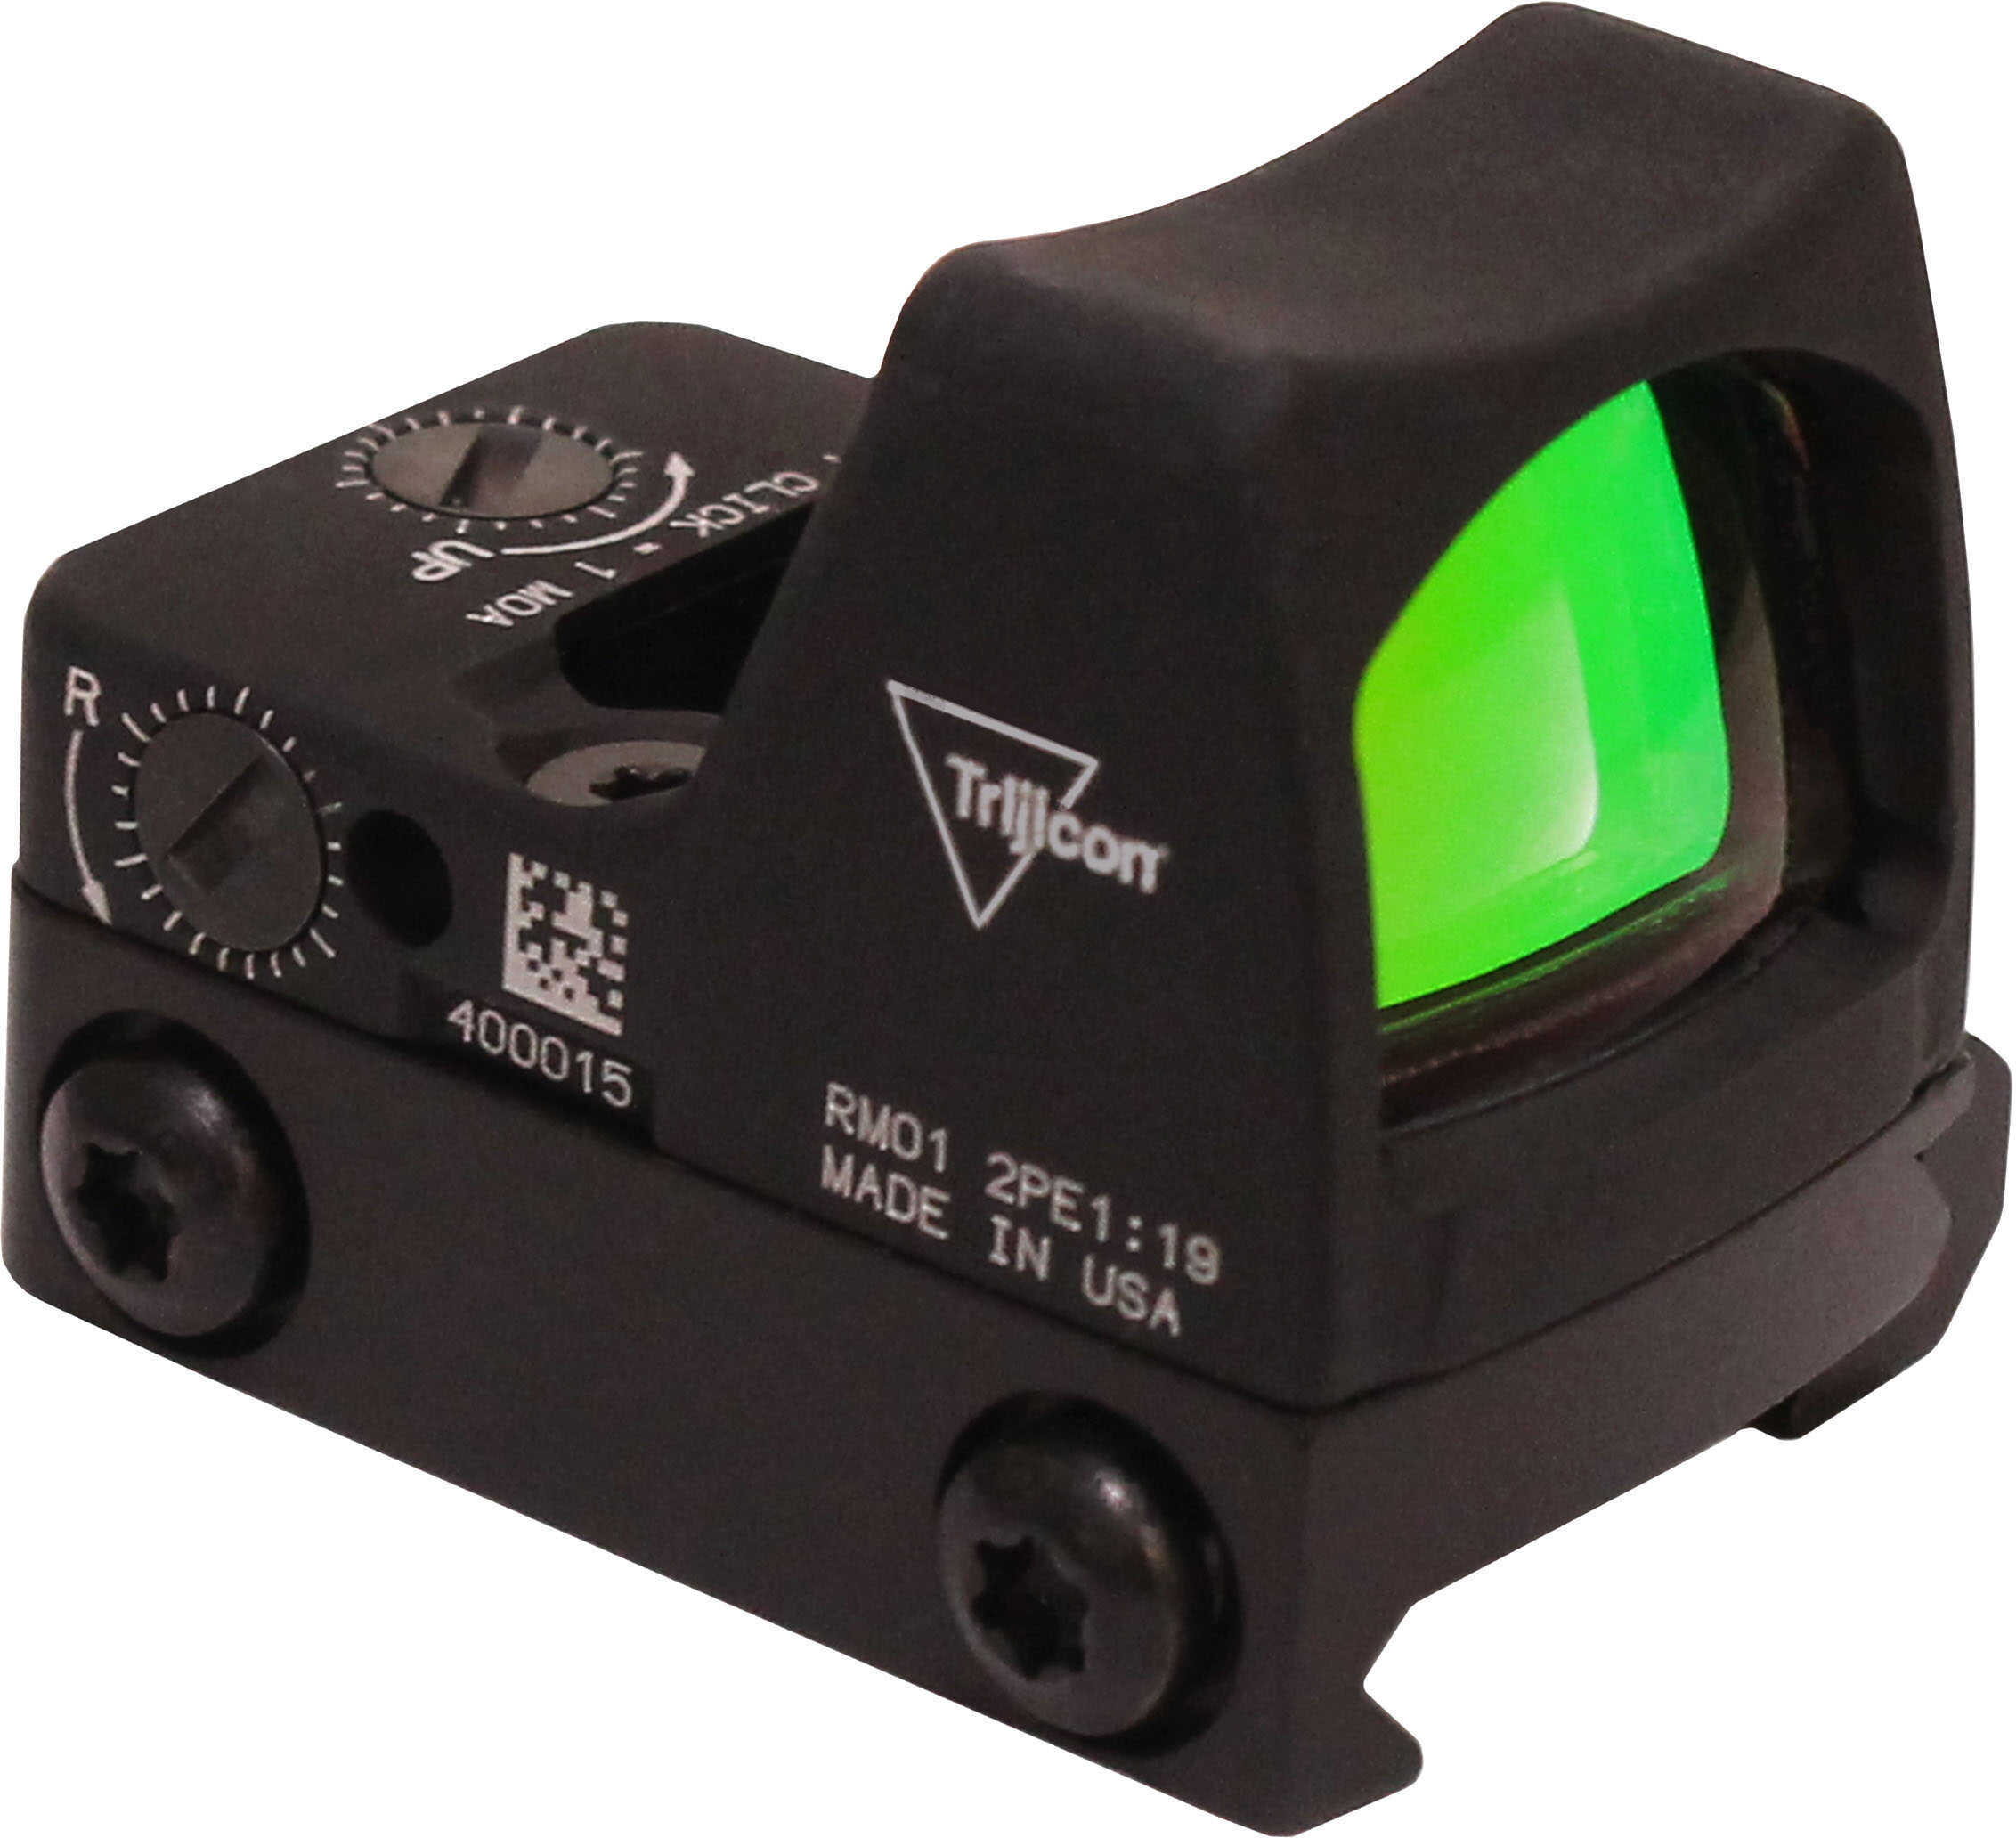 RMR Type 2 LED Sight - 3.25 MOA Red Dot Reticle with RM33 Picatinny Rail Mount, Black Md: RM01-C-700